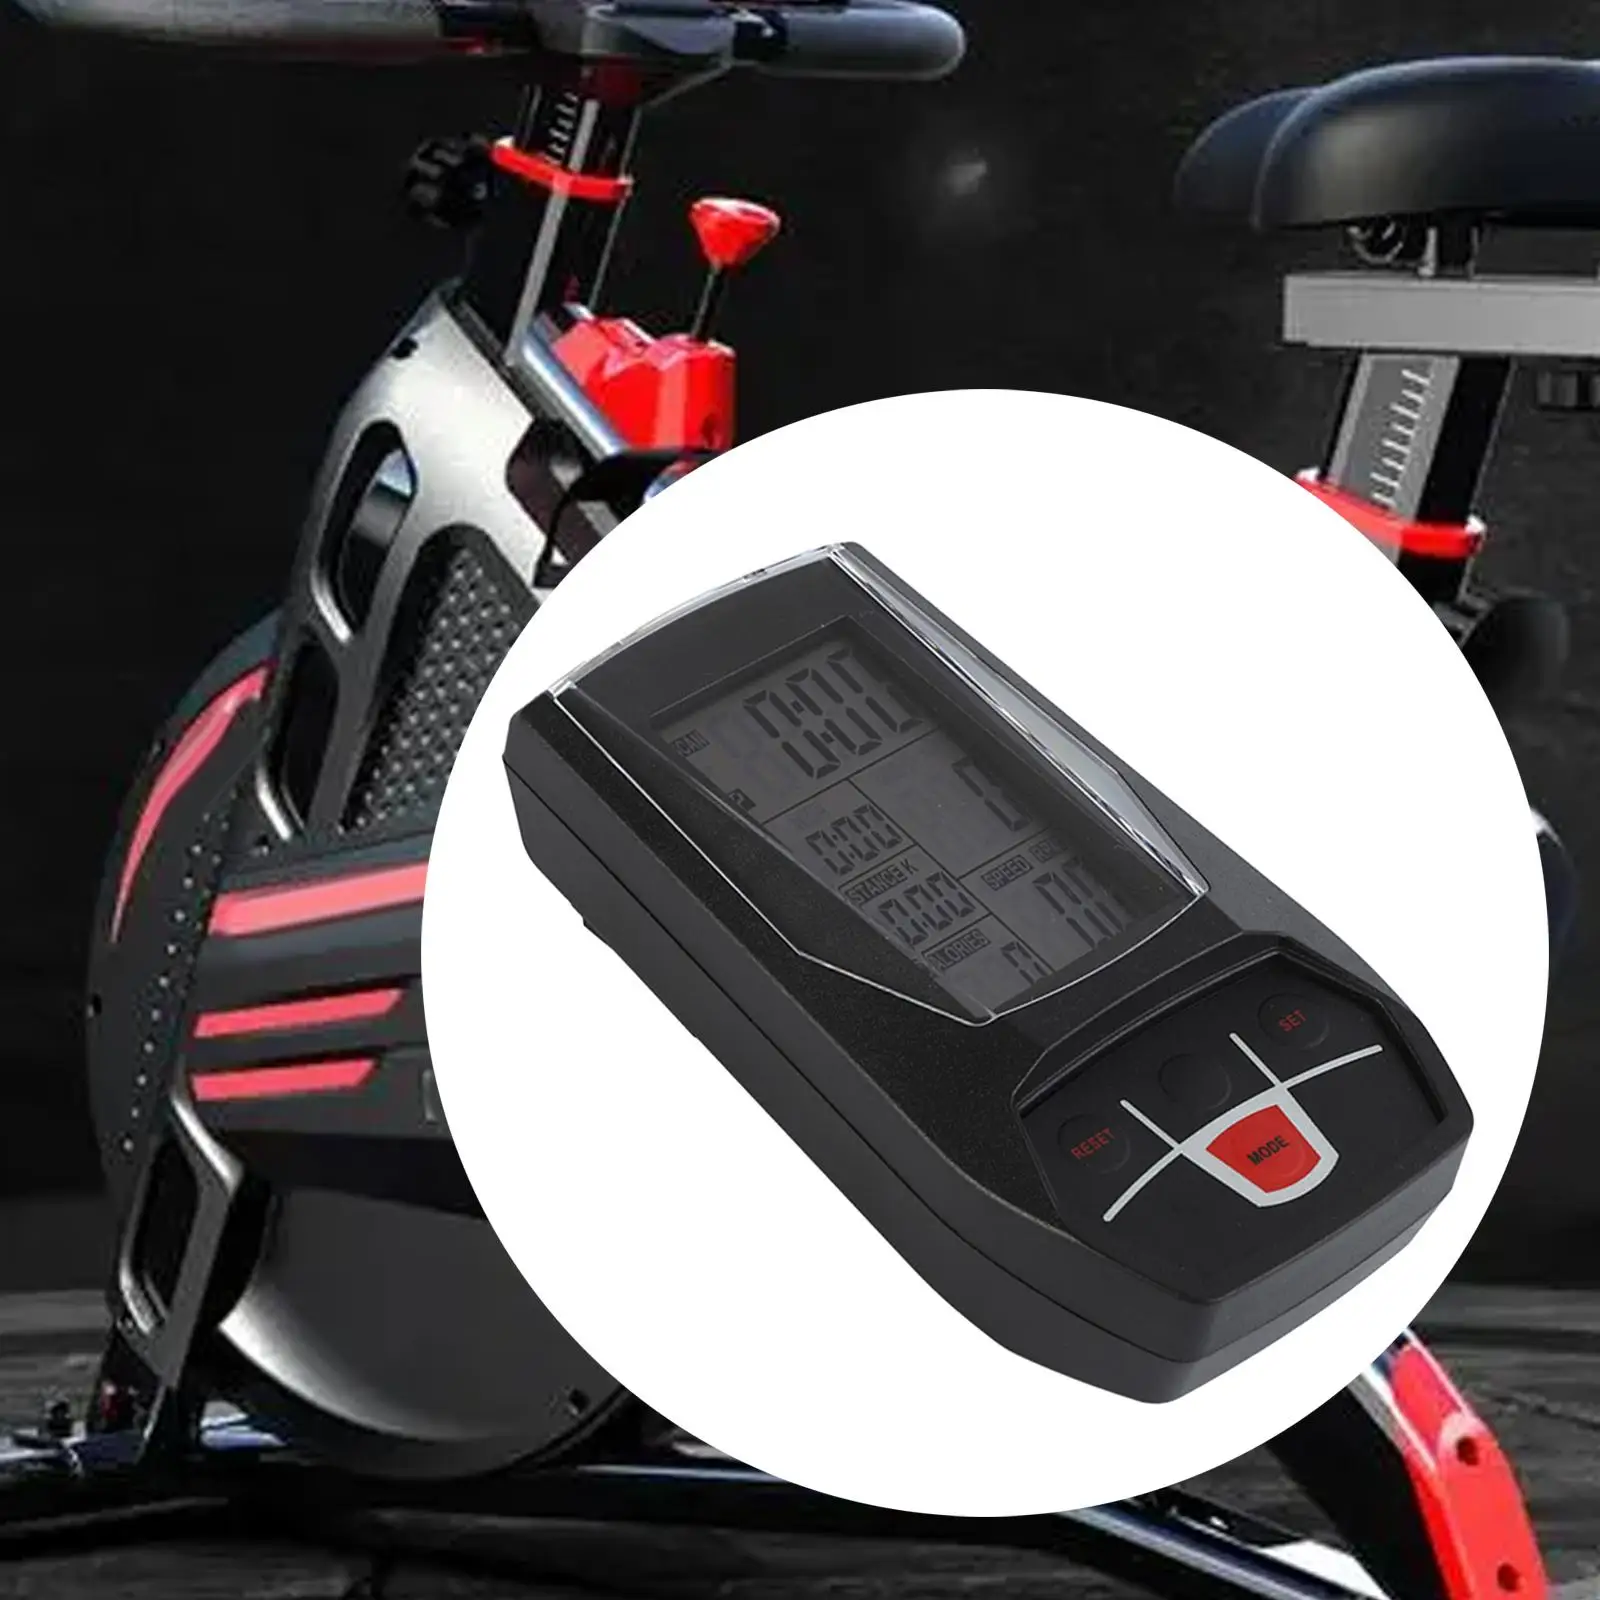 

Monitor Speedometer Digital Multifunctional Exercise Bike Computer for Stationary Bikes Workout Home Gym Treadmills Indoor Cycle